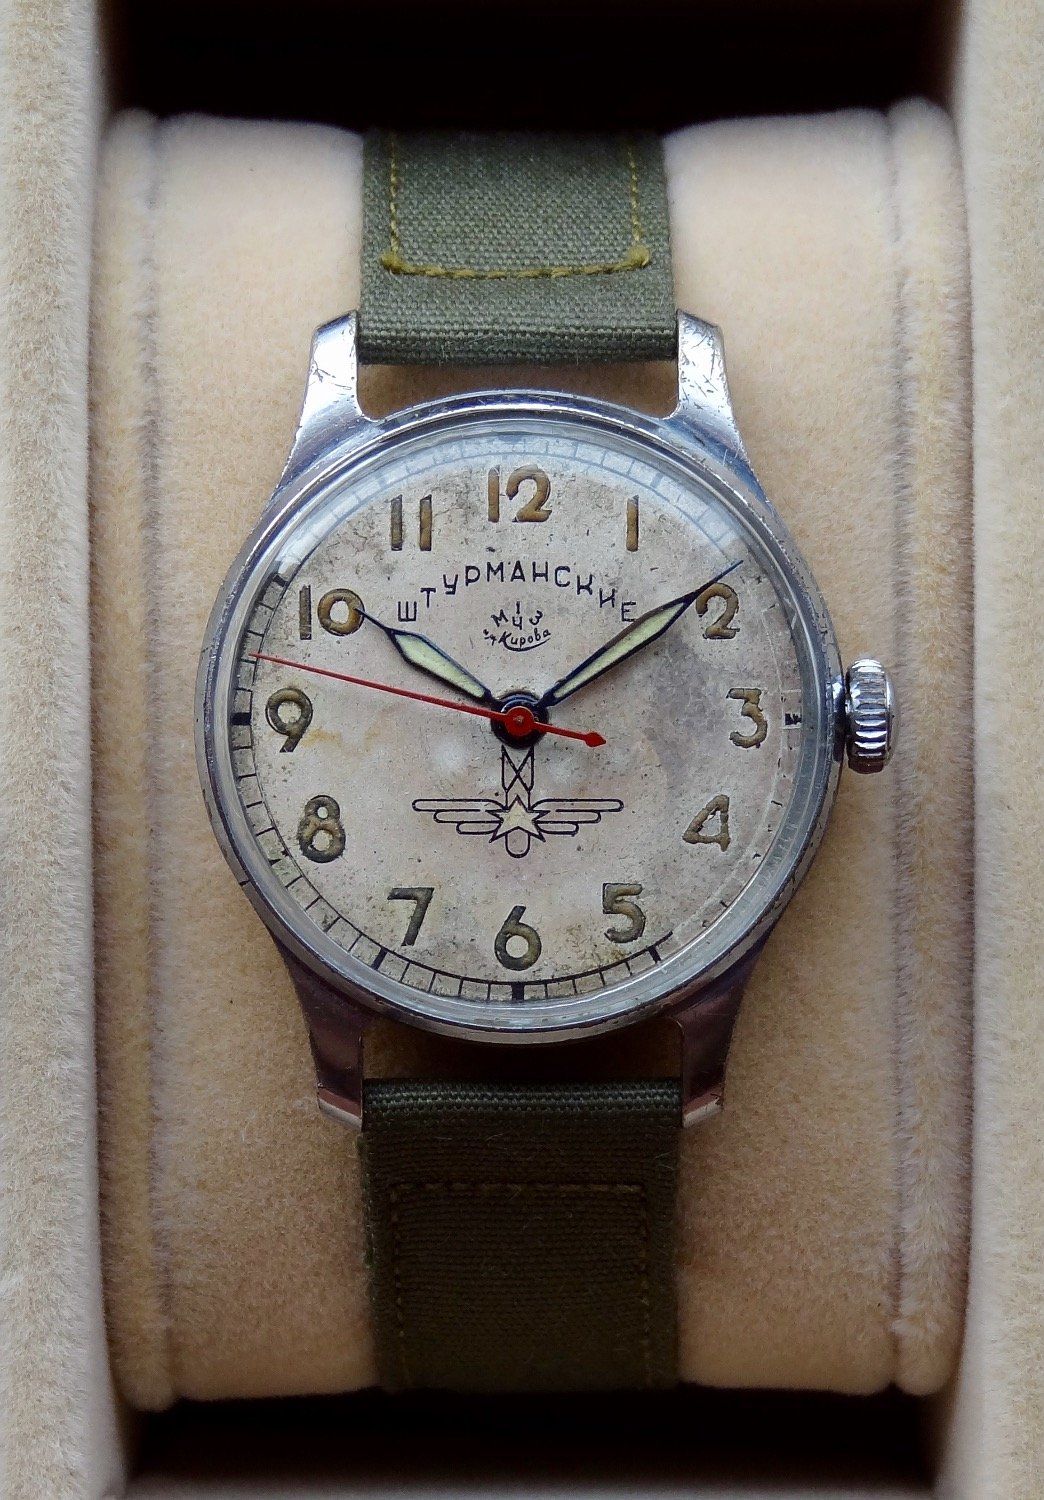 Sturmanskie Cosmonaut’s watch ( Watch of Yuri Gagarin during his space mission) (Courtesy: Dashiell Stanford; https://mroatman.wixsite.com/watches-of-the-ussr)